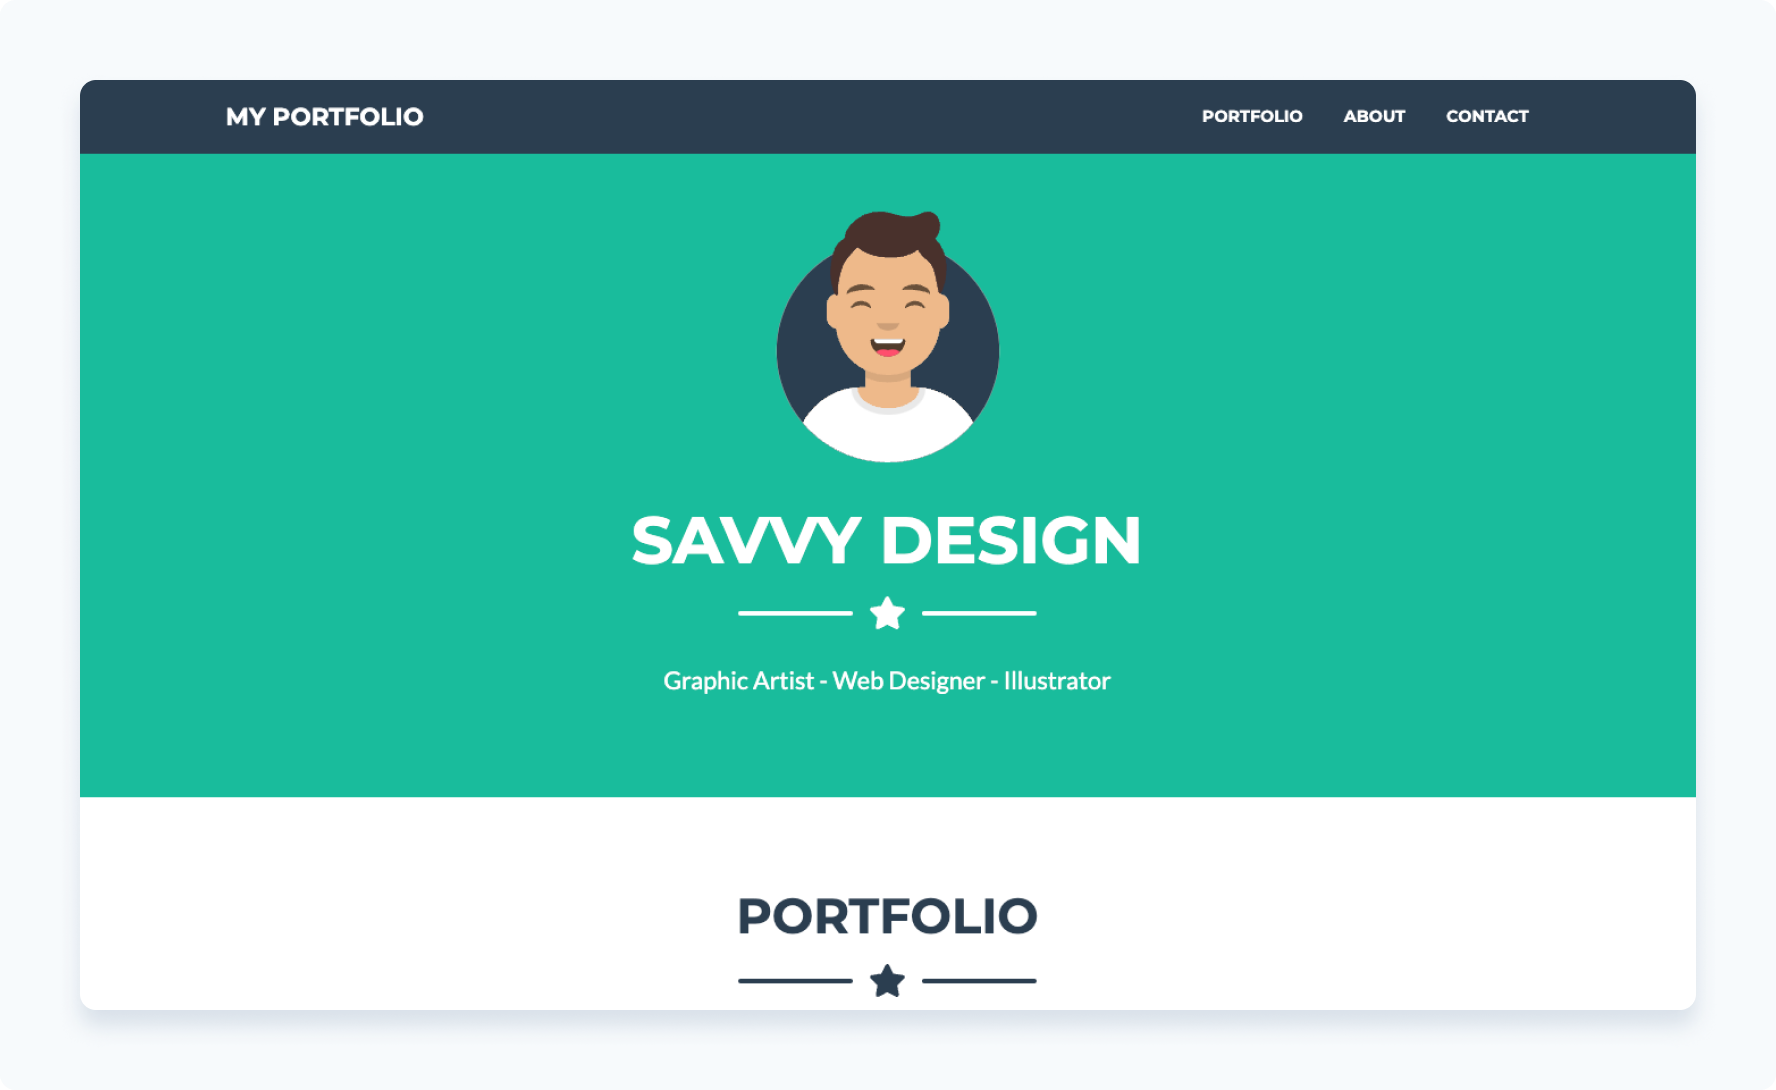 Basic profile site from SmartBootstrap